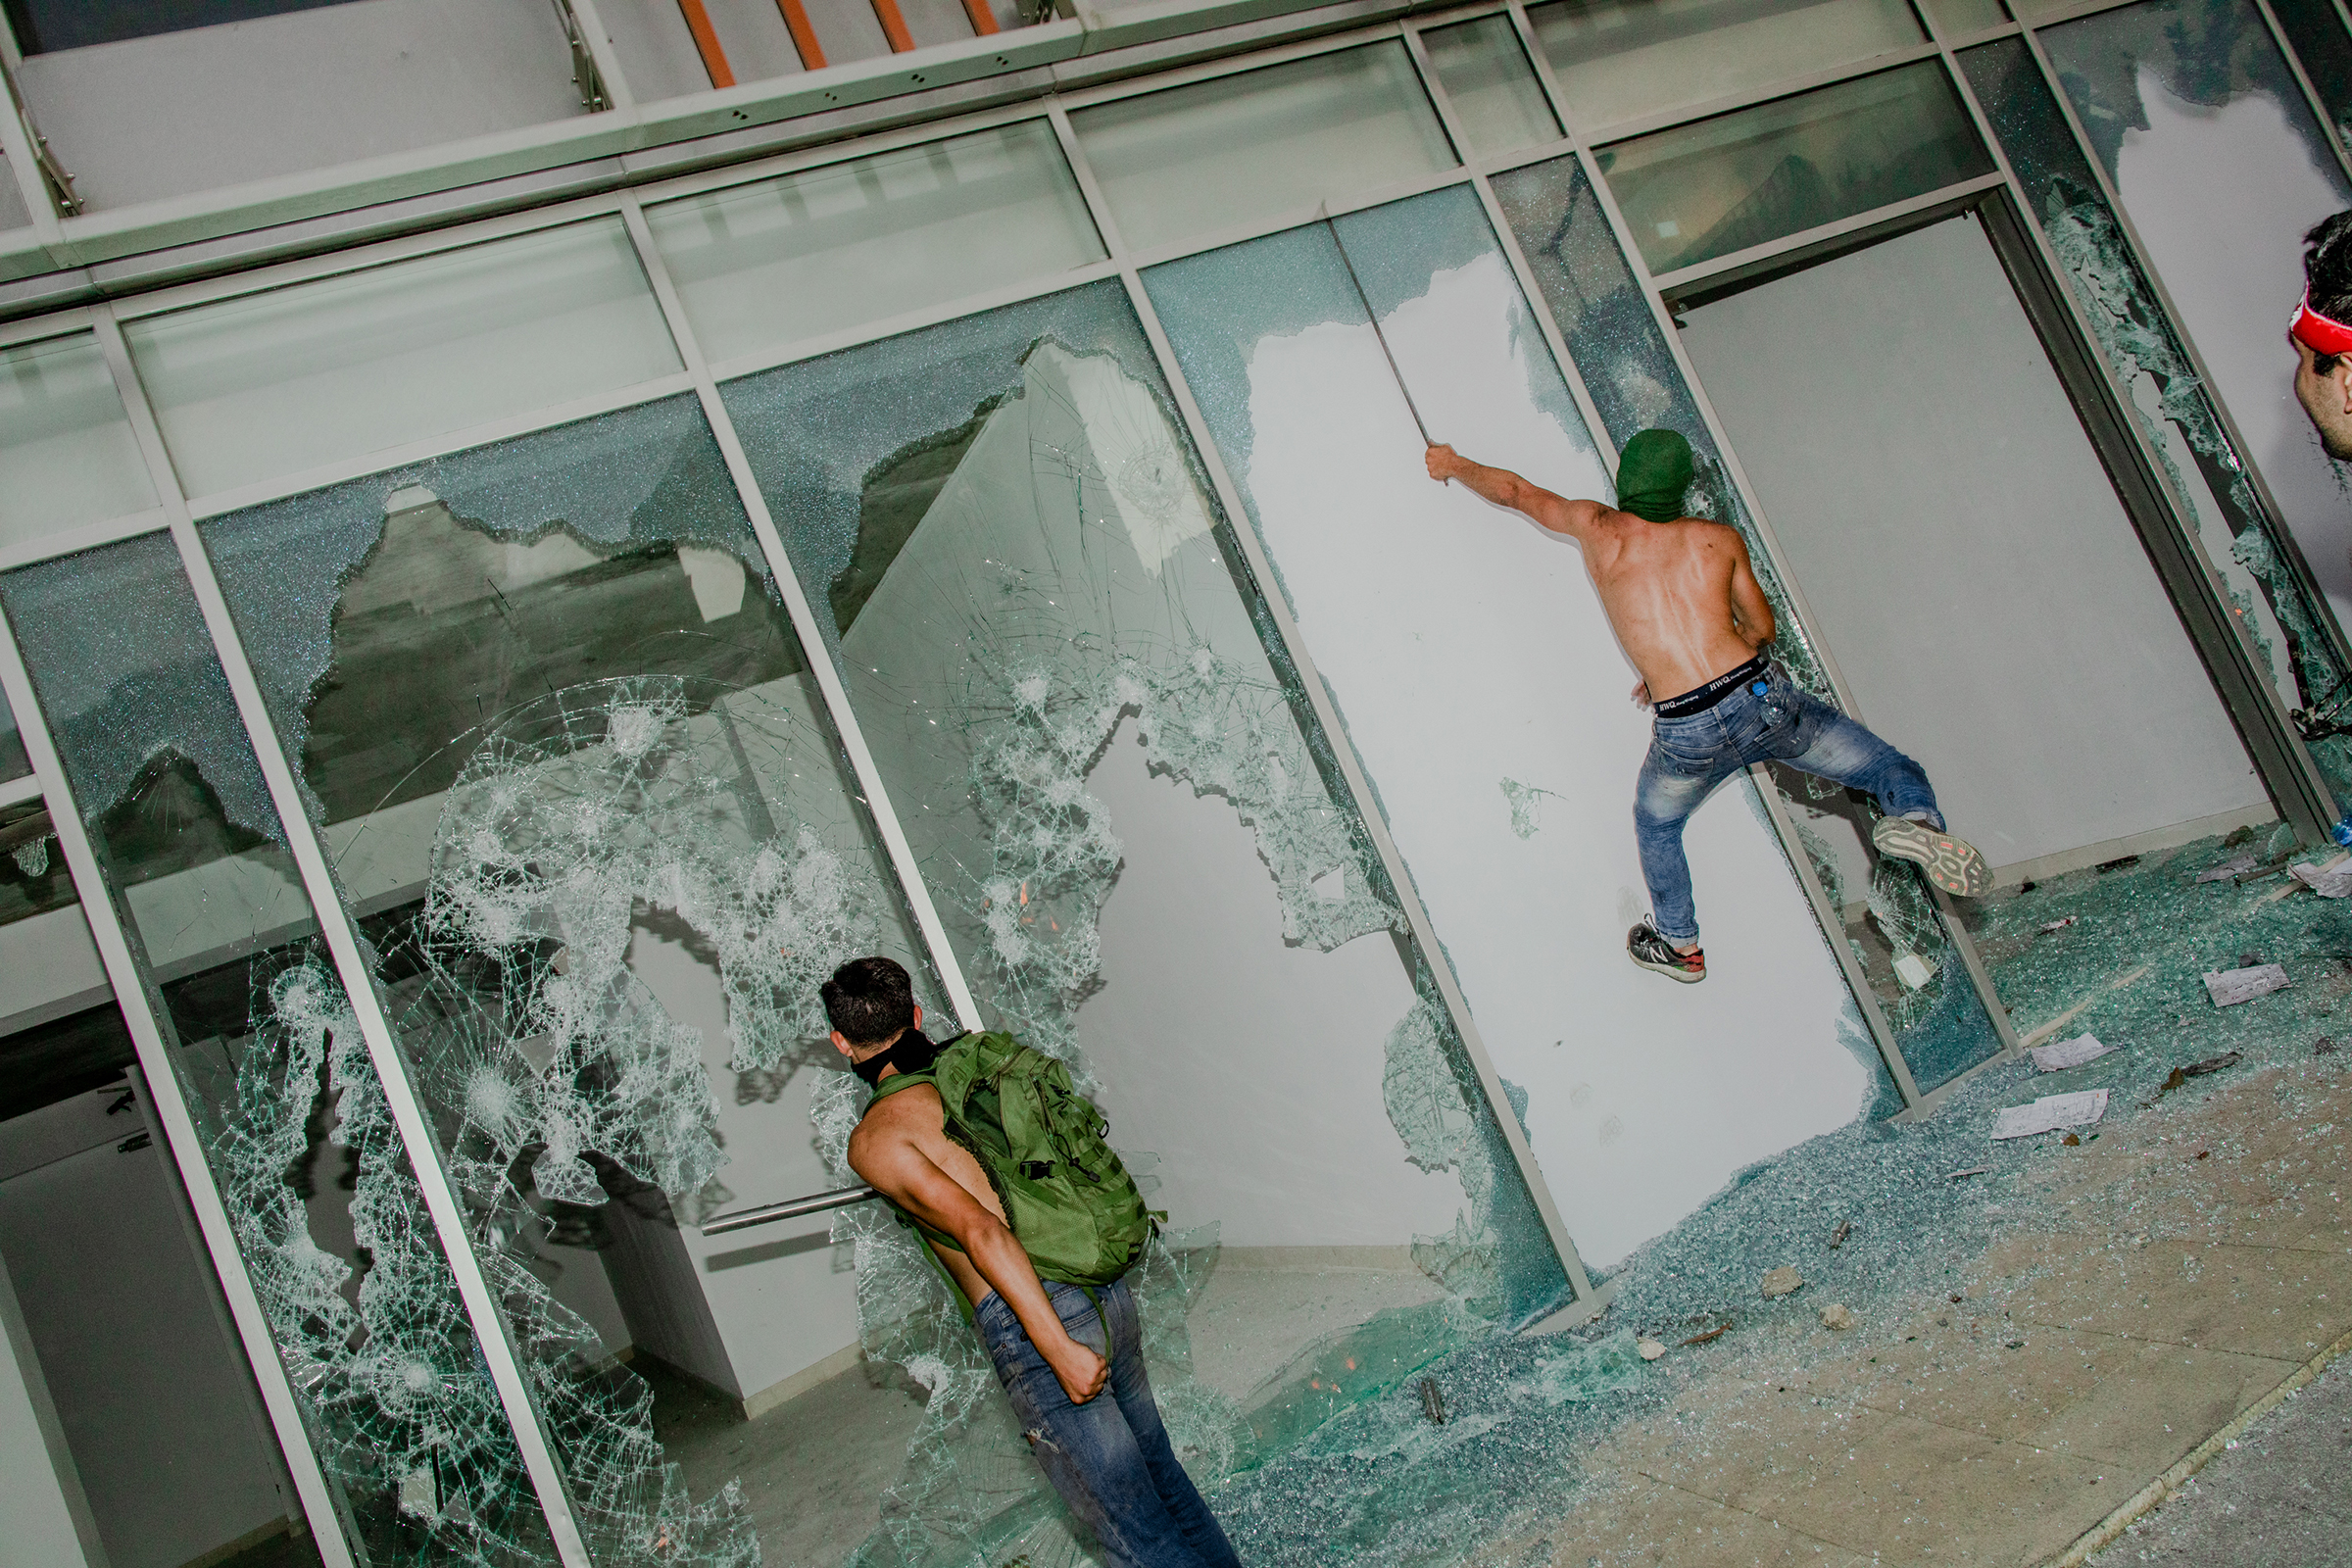 Young men smashing shop windows on the first day of protests in Beirut on Oct. 18, 2019. (Myriam Boulos)